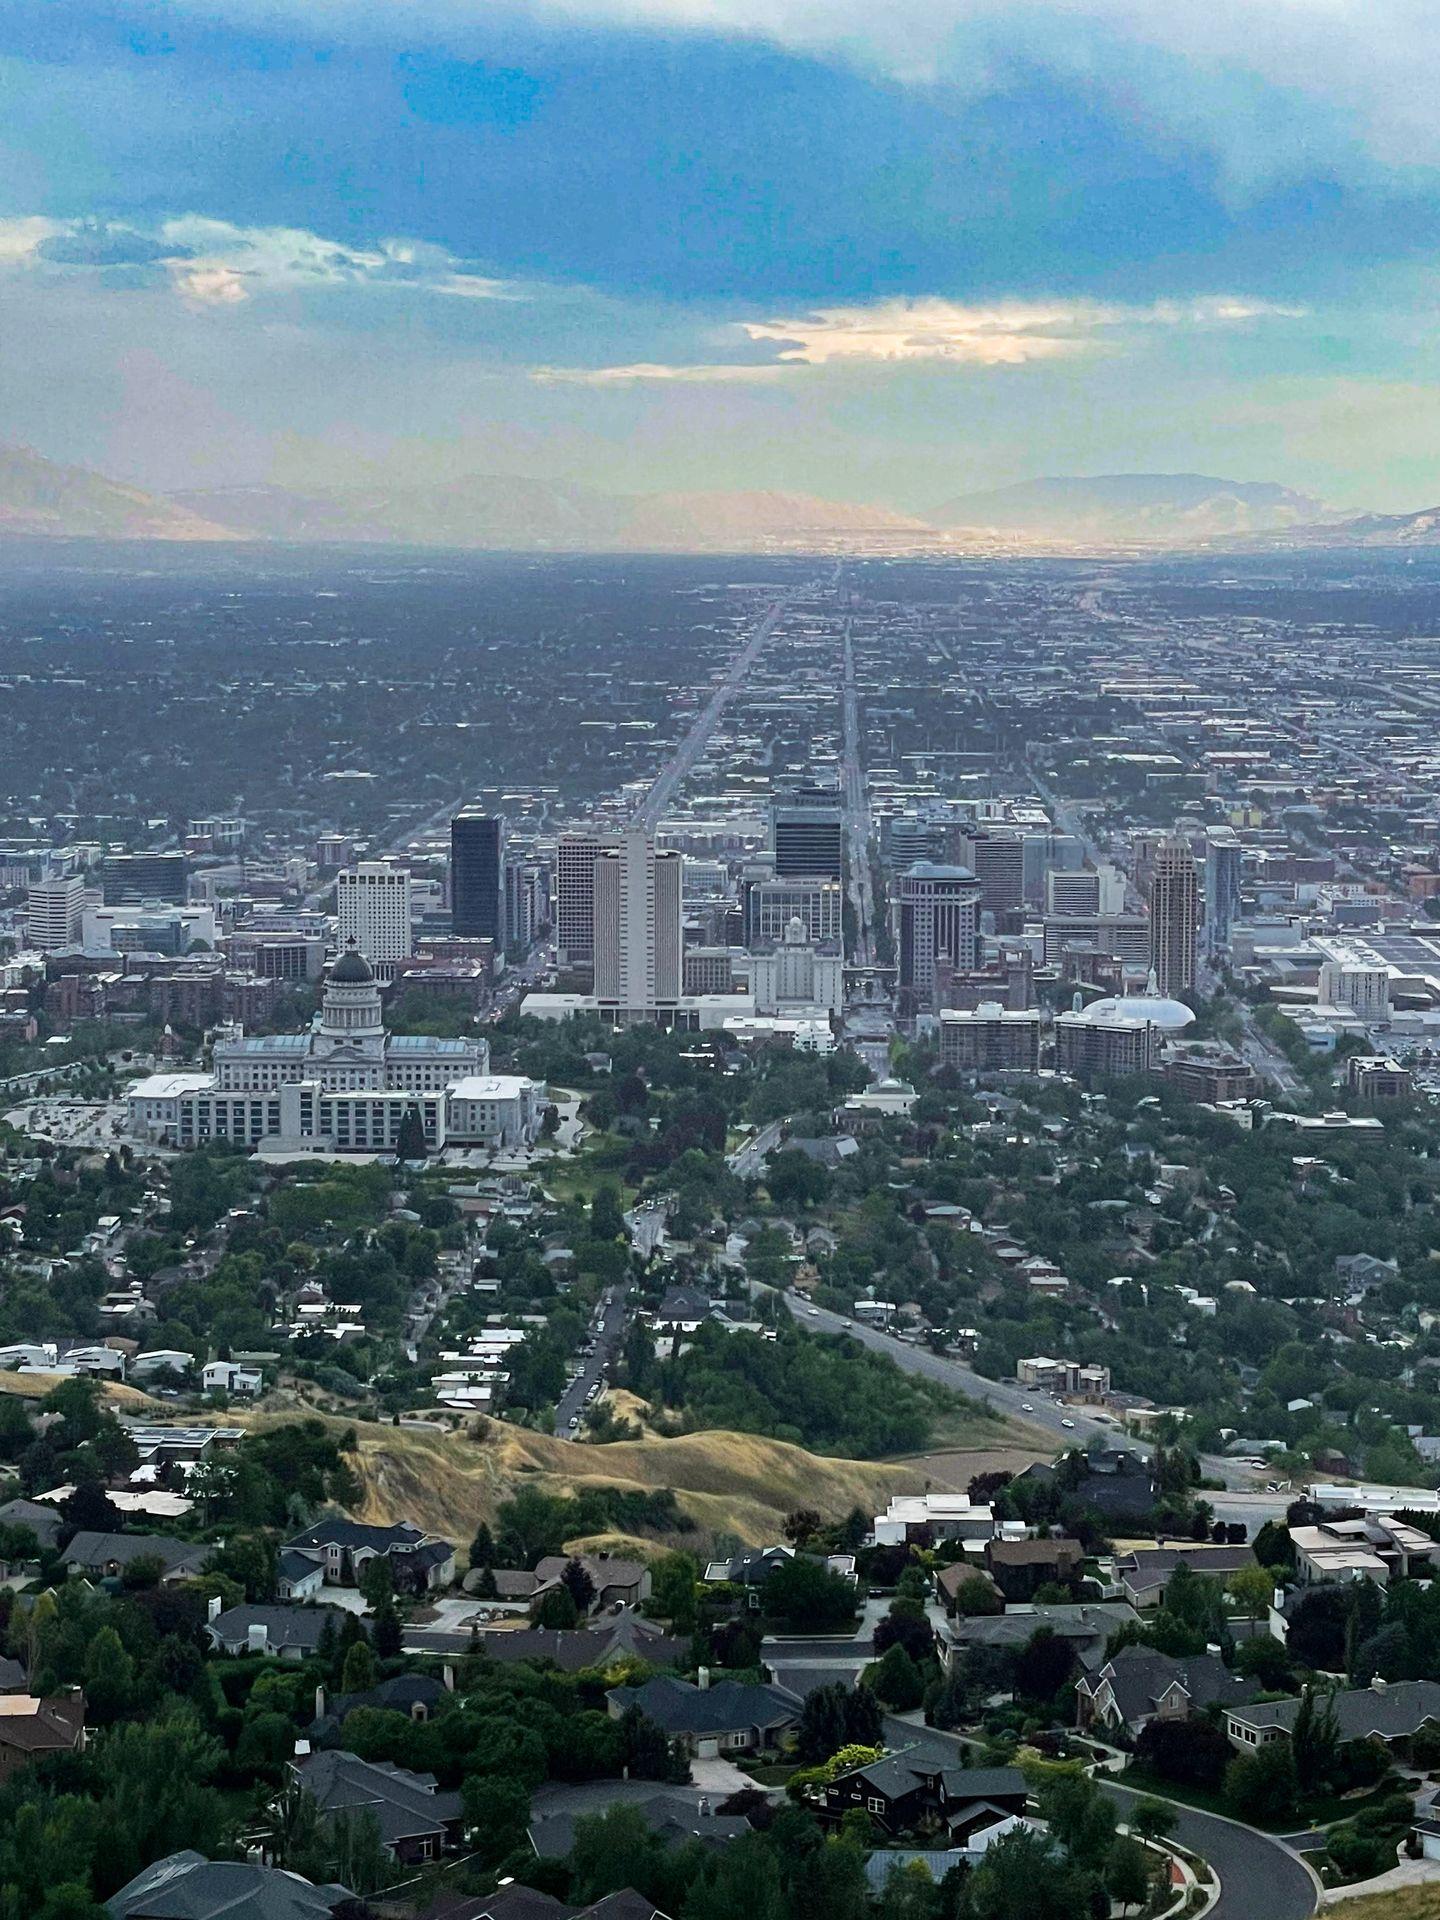 A view of downtown Salt Lake City in the distance, seen from Ensign Peak.